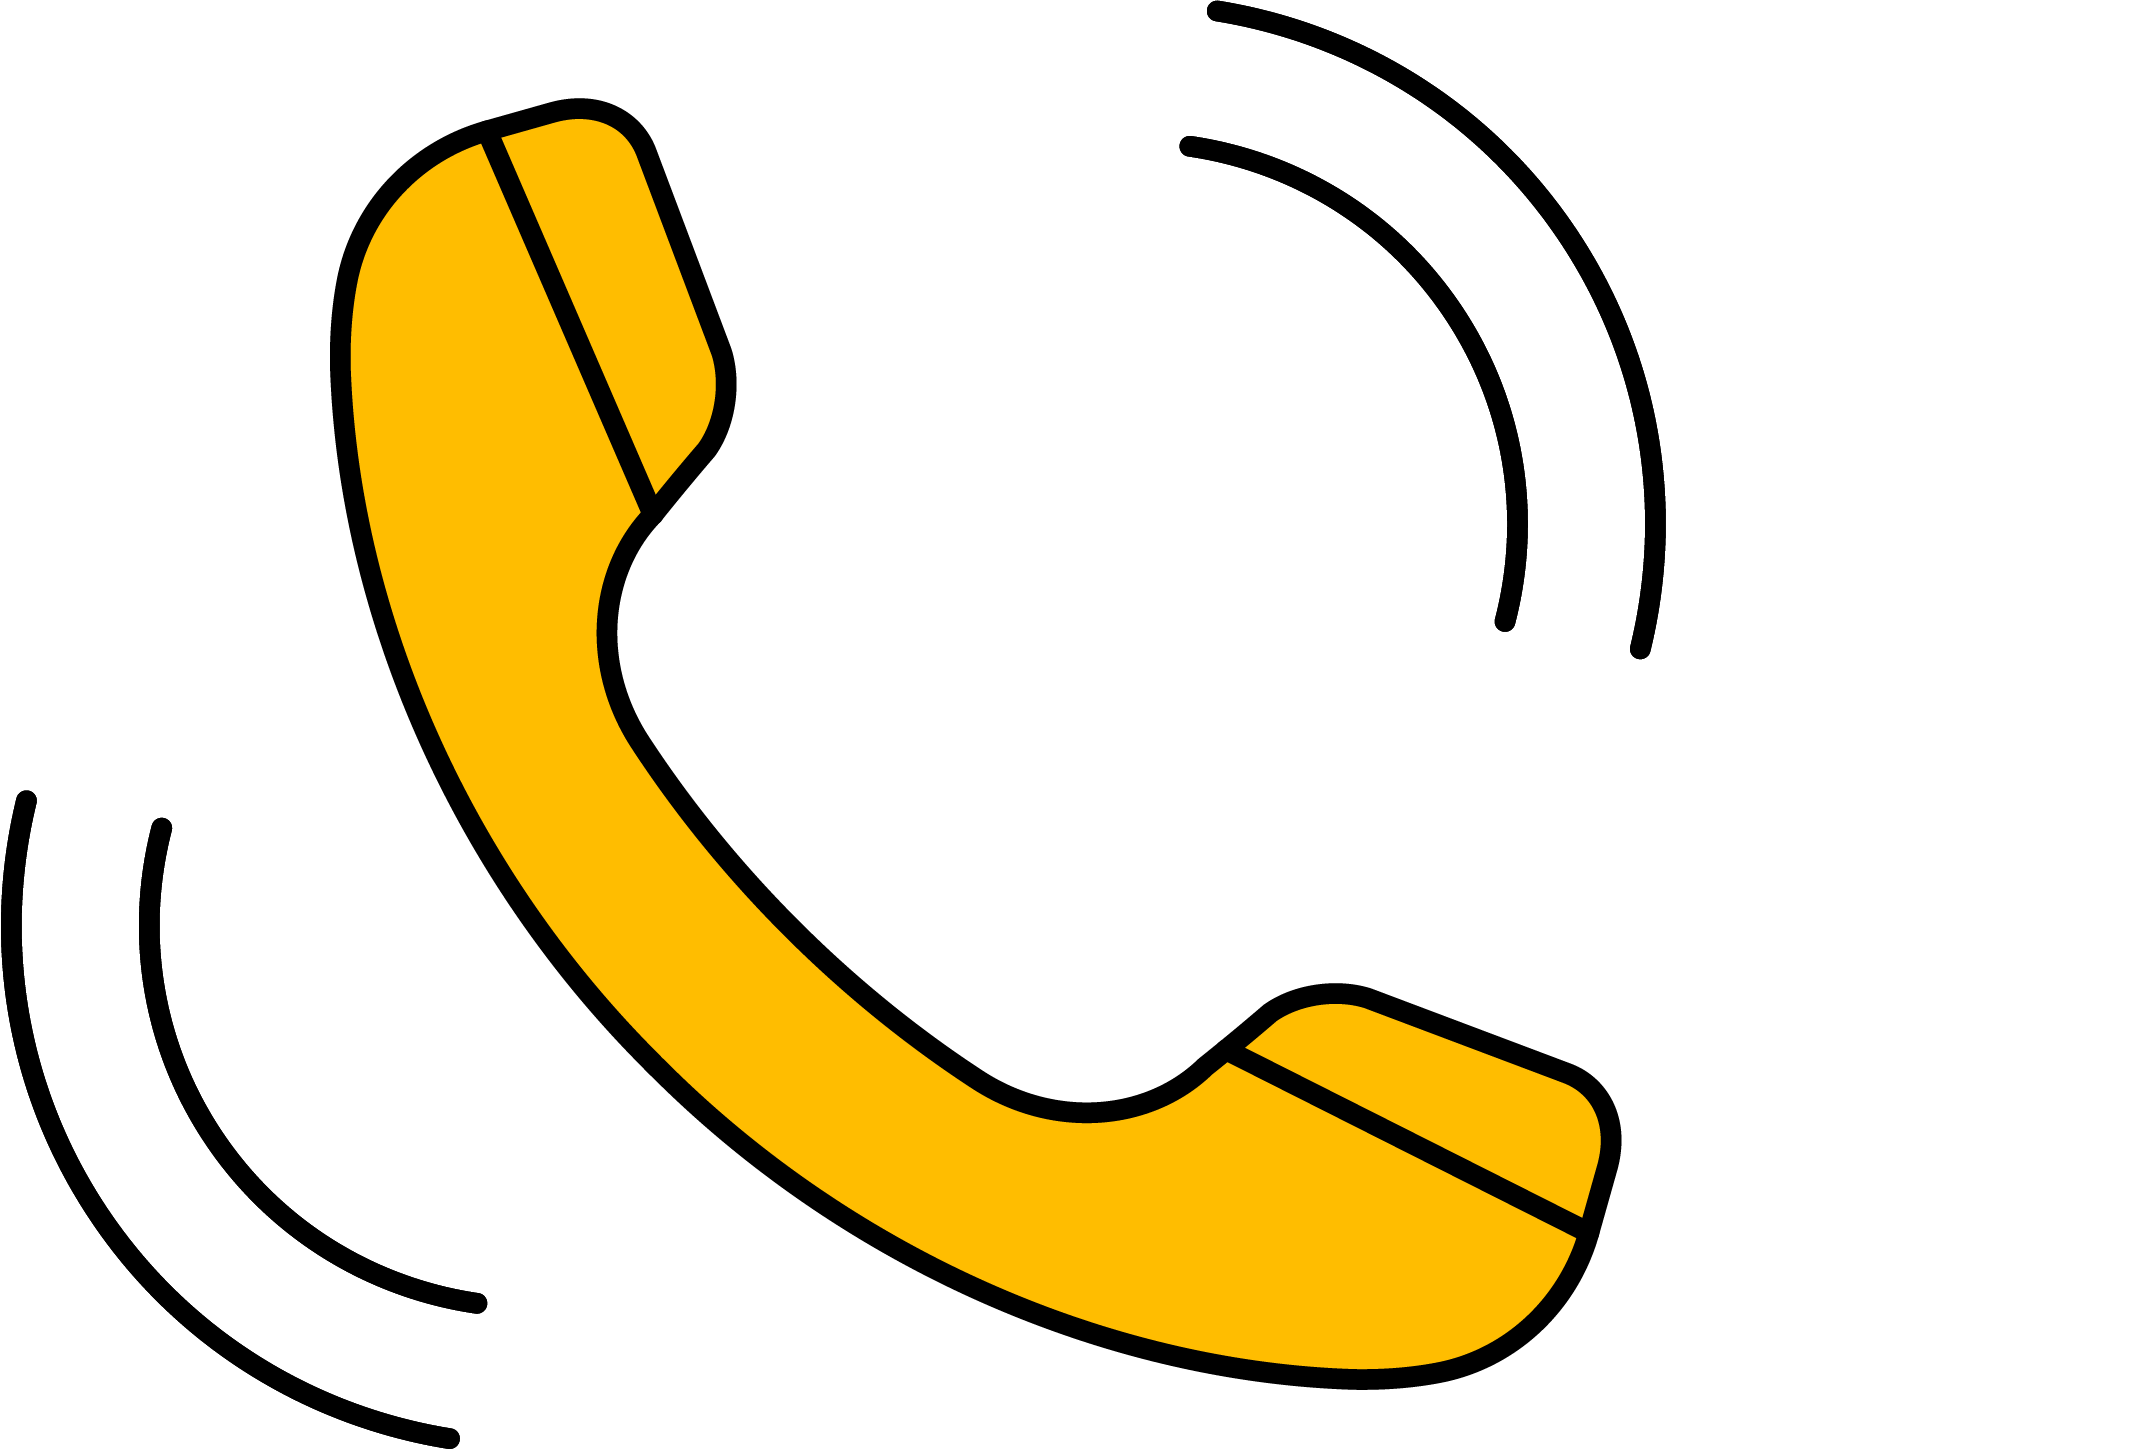 Image of a yellow phone ringing